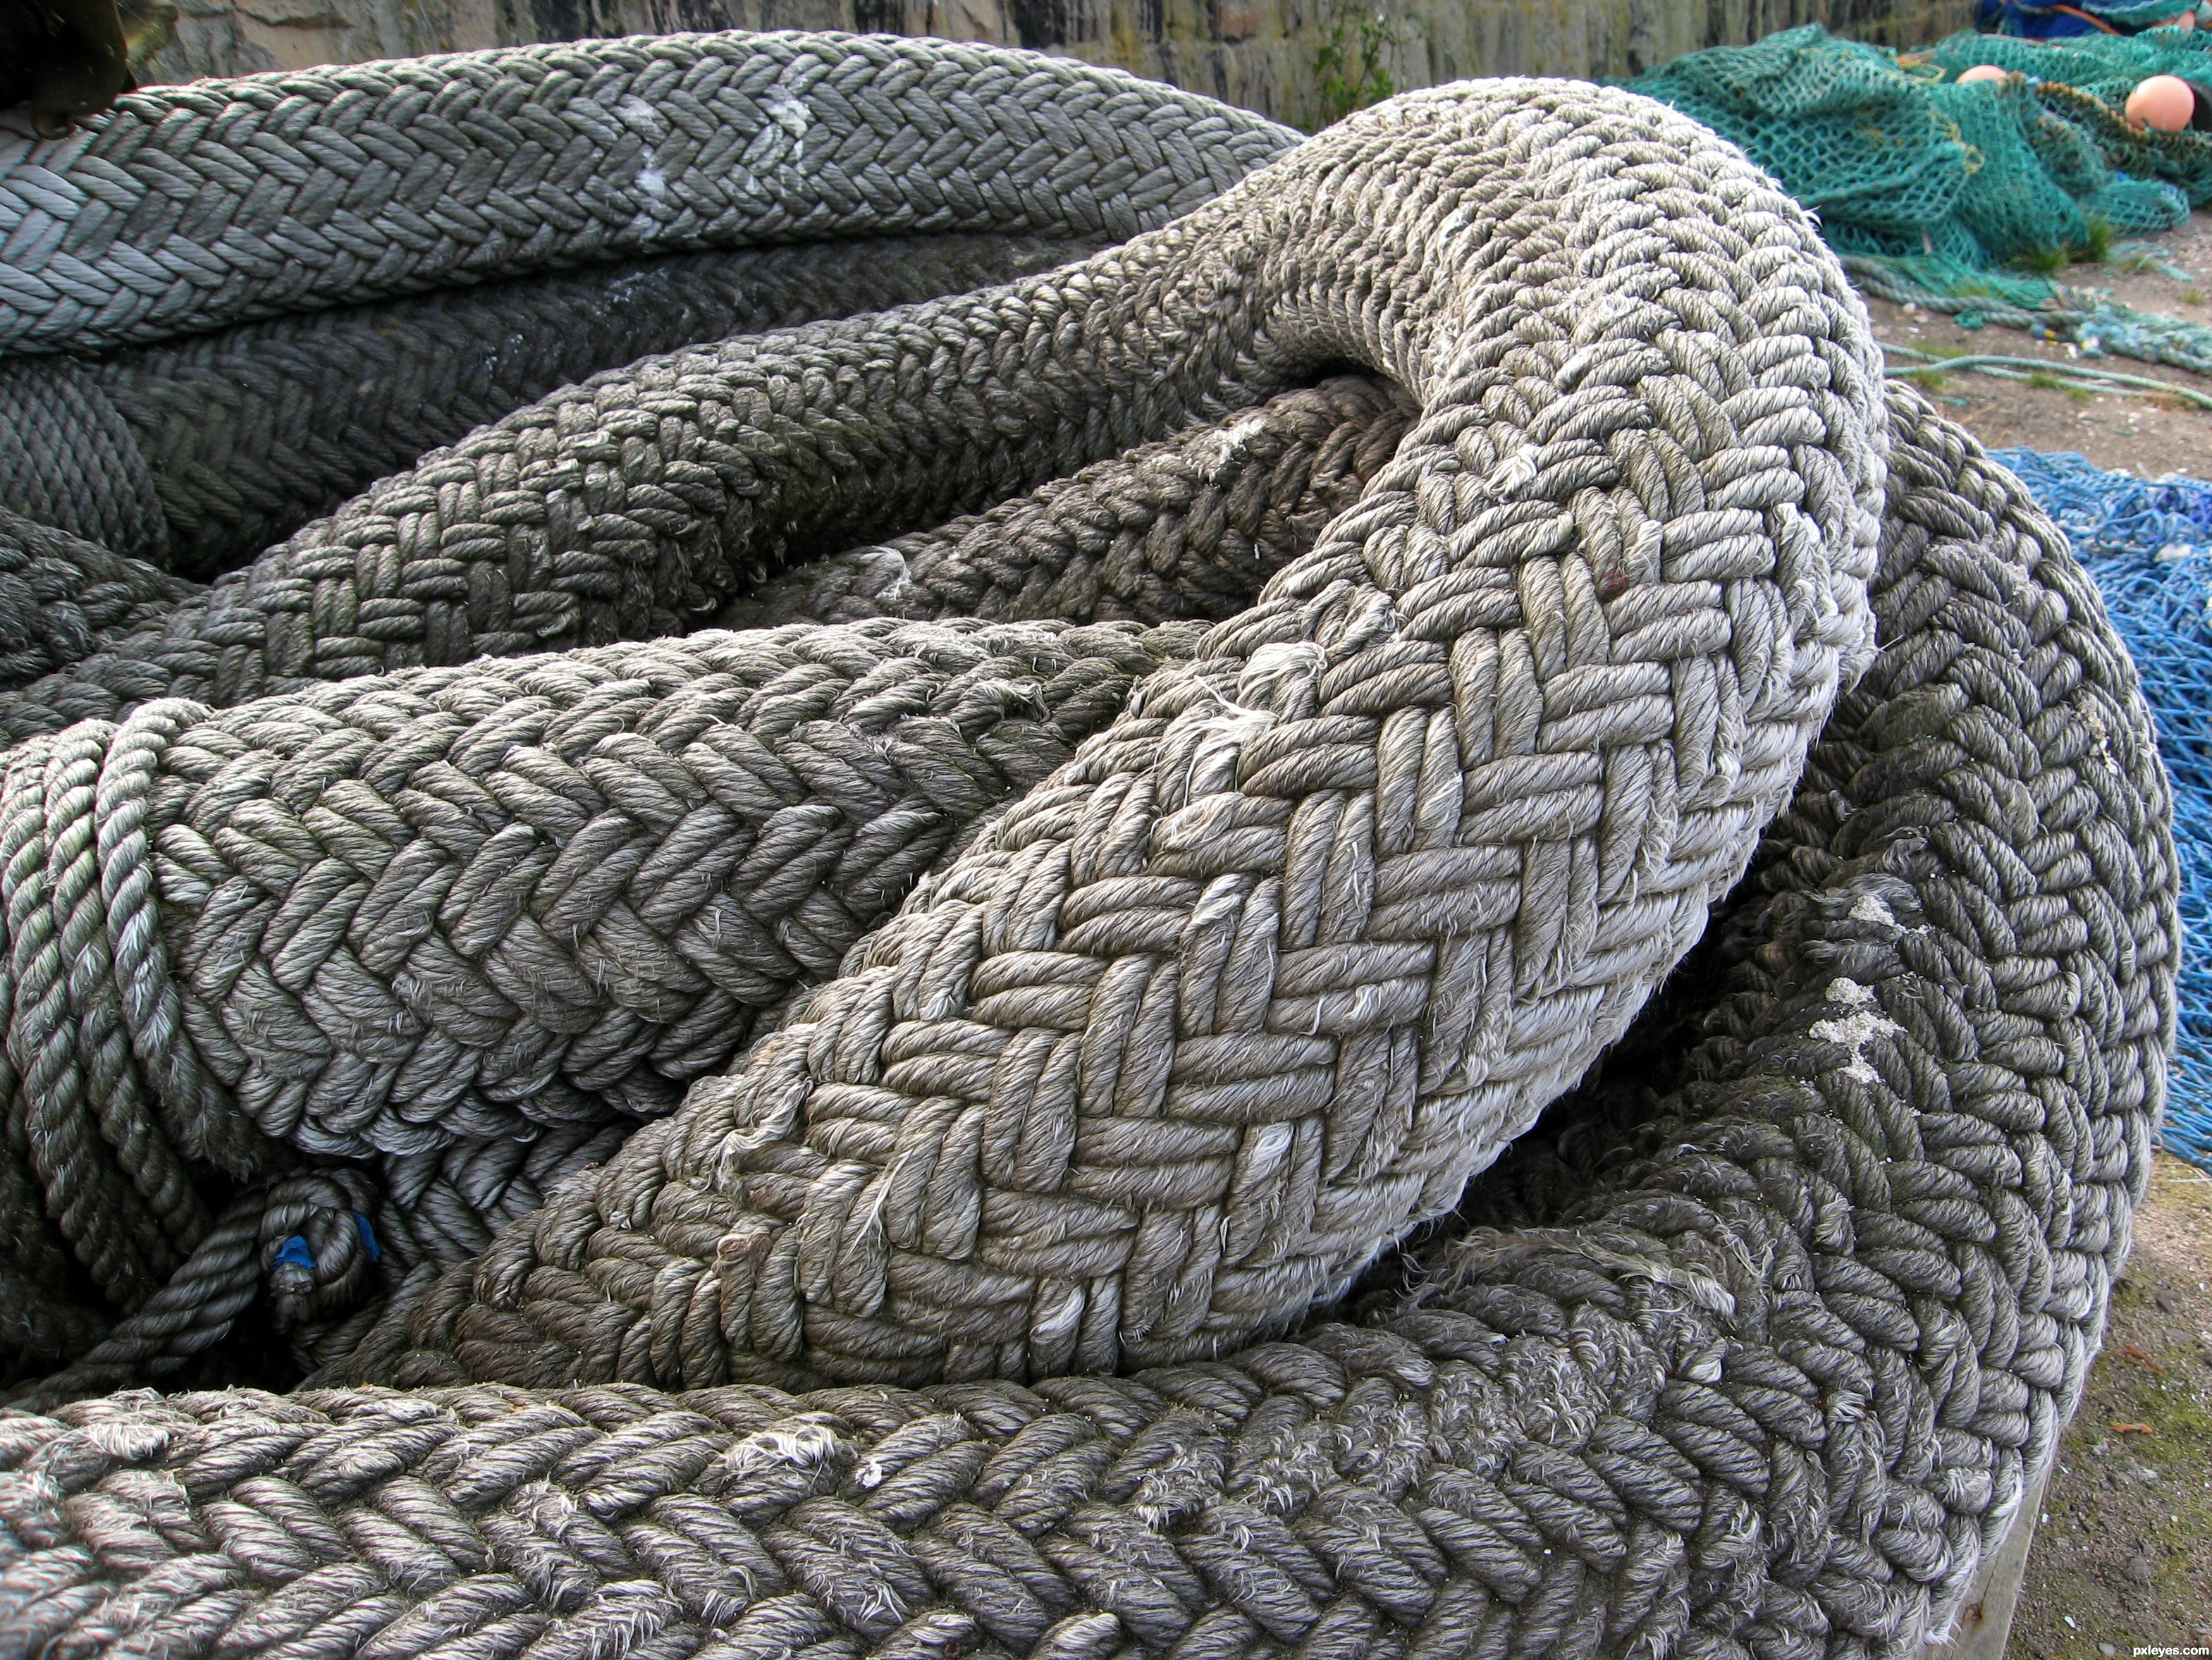 Ship's Rope picture, by jeaniblog for: material closeup photography contest  